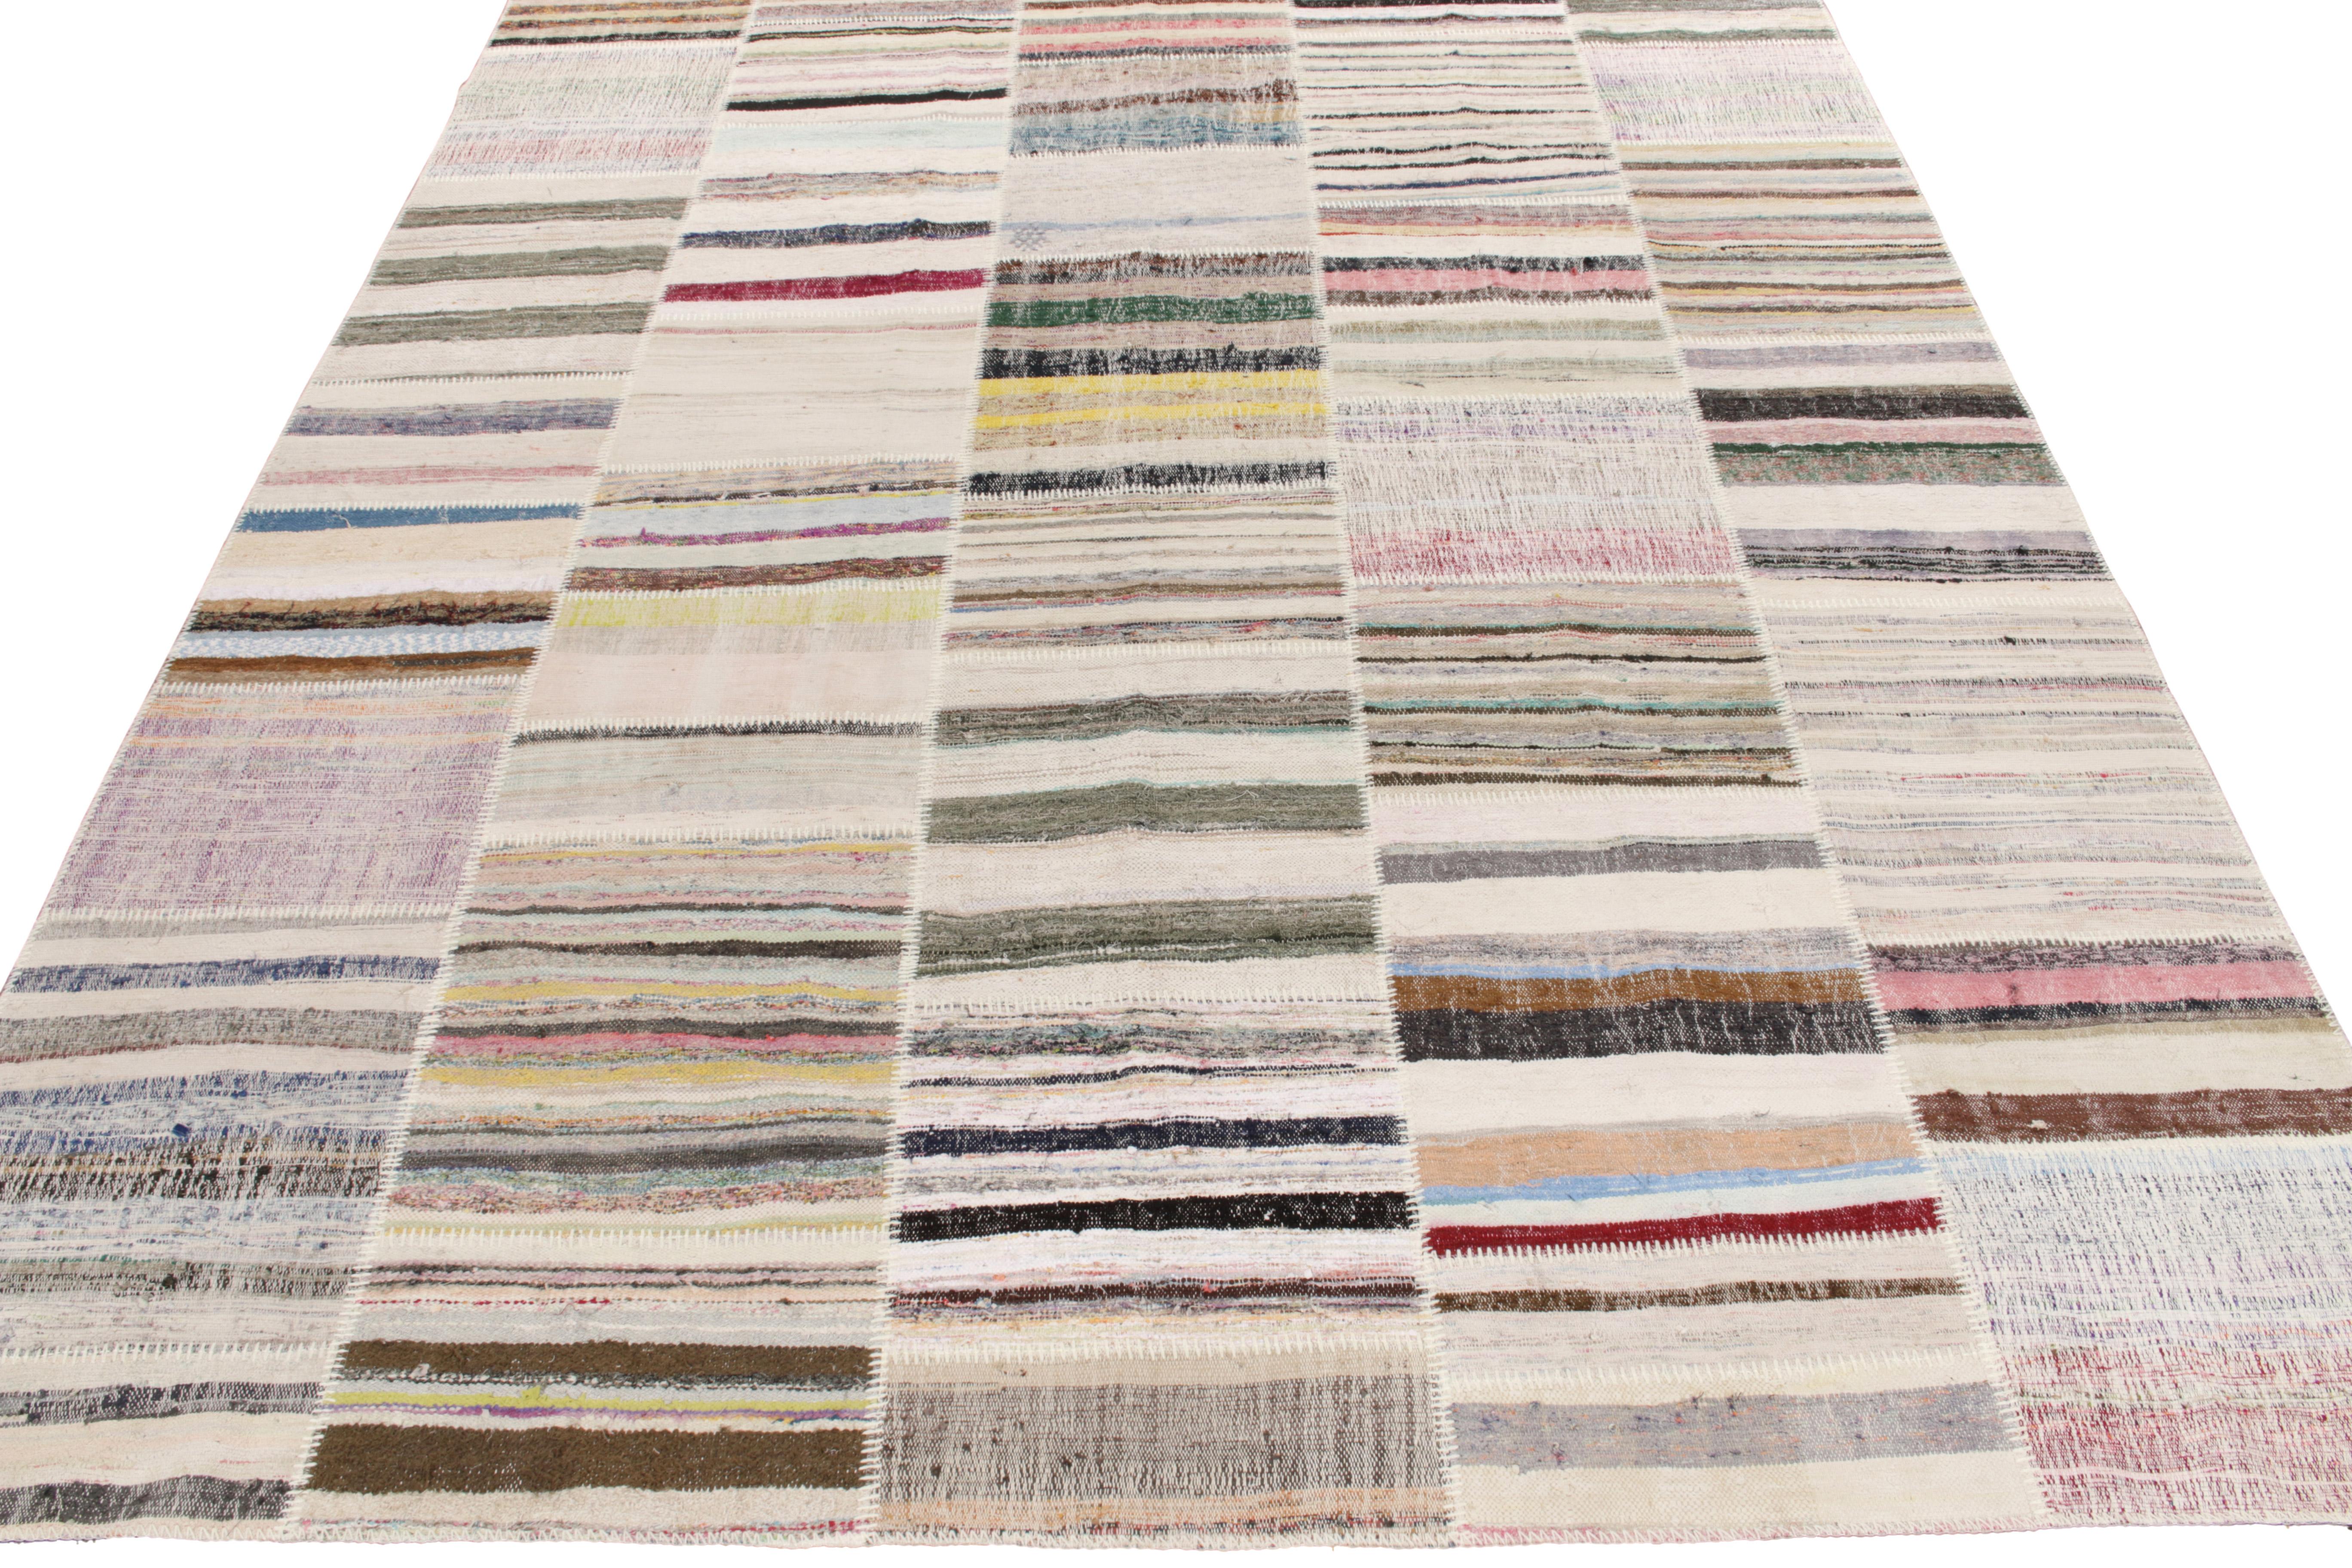 Rug & Kilim takes pride in presenting its artistic vision of patchwork kilim that reimagines vintage yarns into unique pieces of art. This 9x12 collectible features a striated pattern that lends a smooth sense of movement in variegated shades across